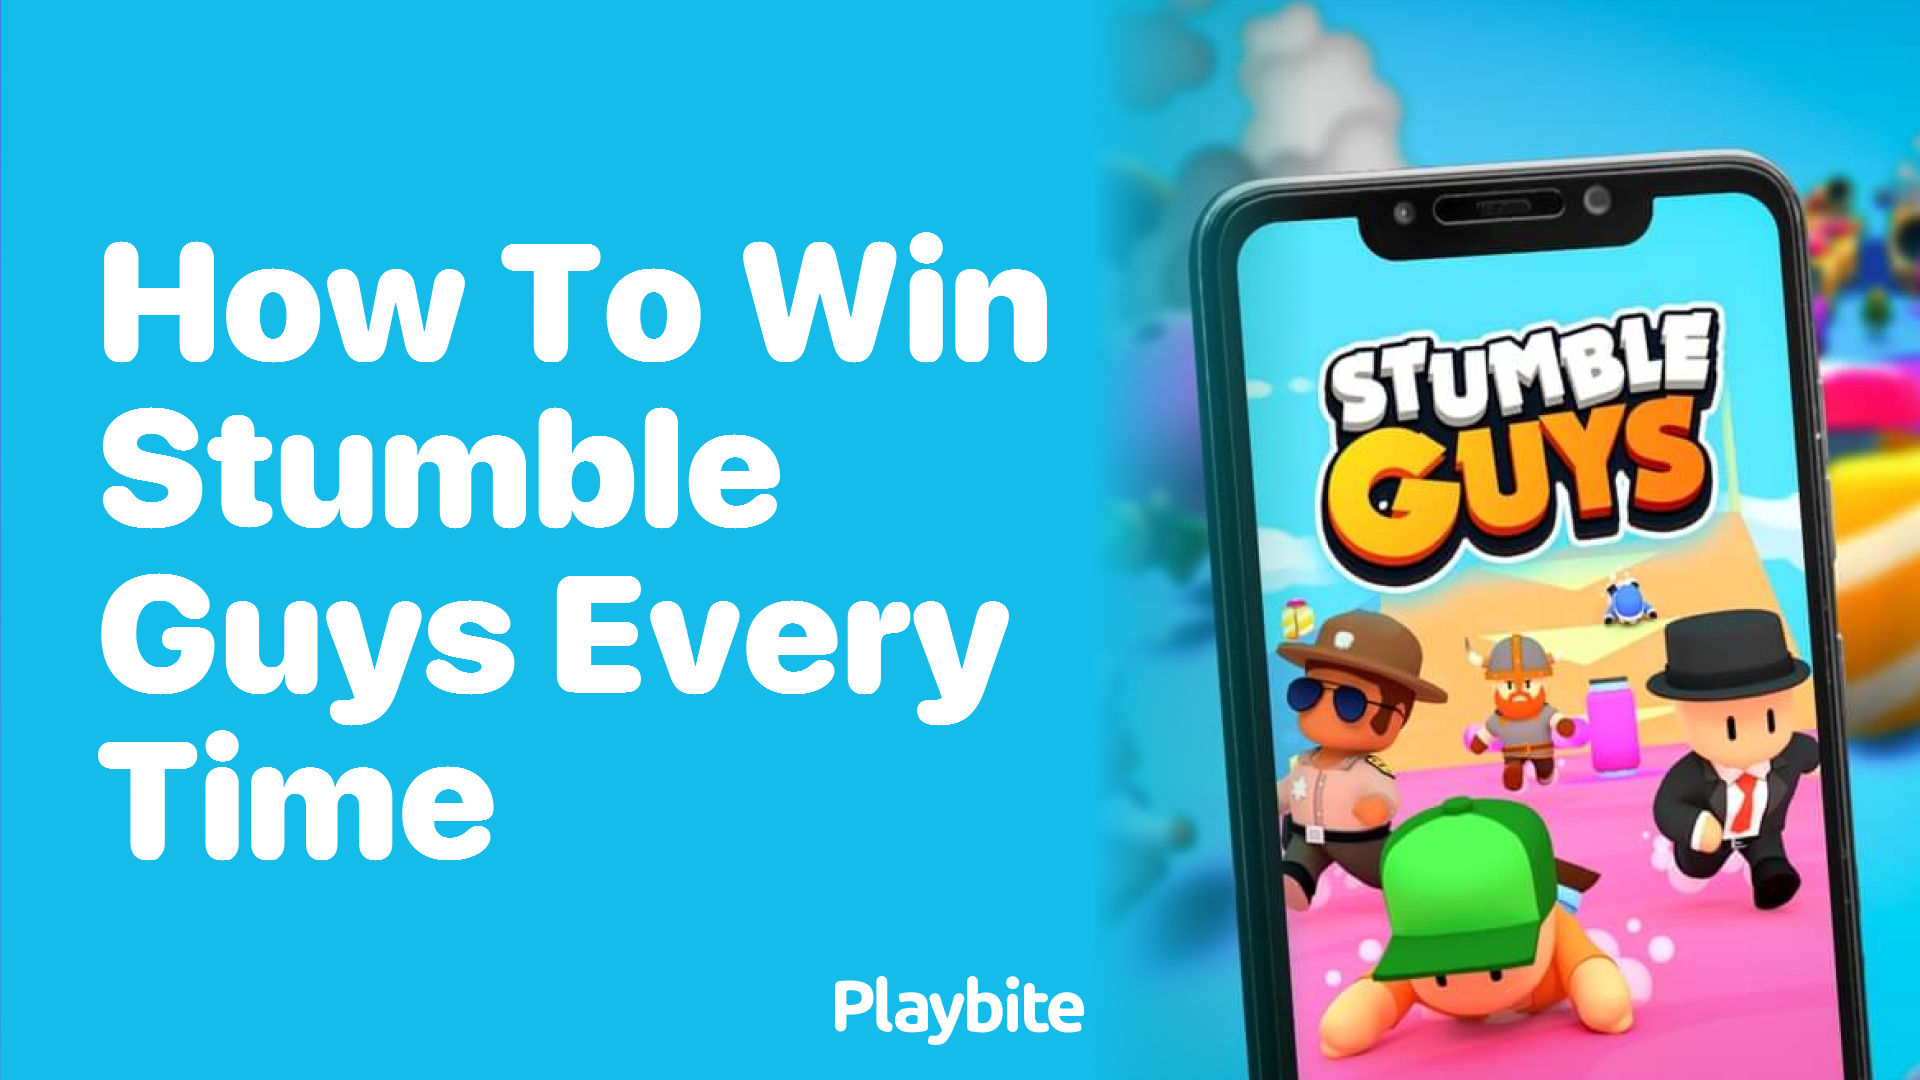 How to Win Stumble Guys Every Time: Tips and Tricks